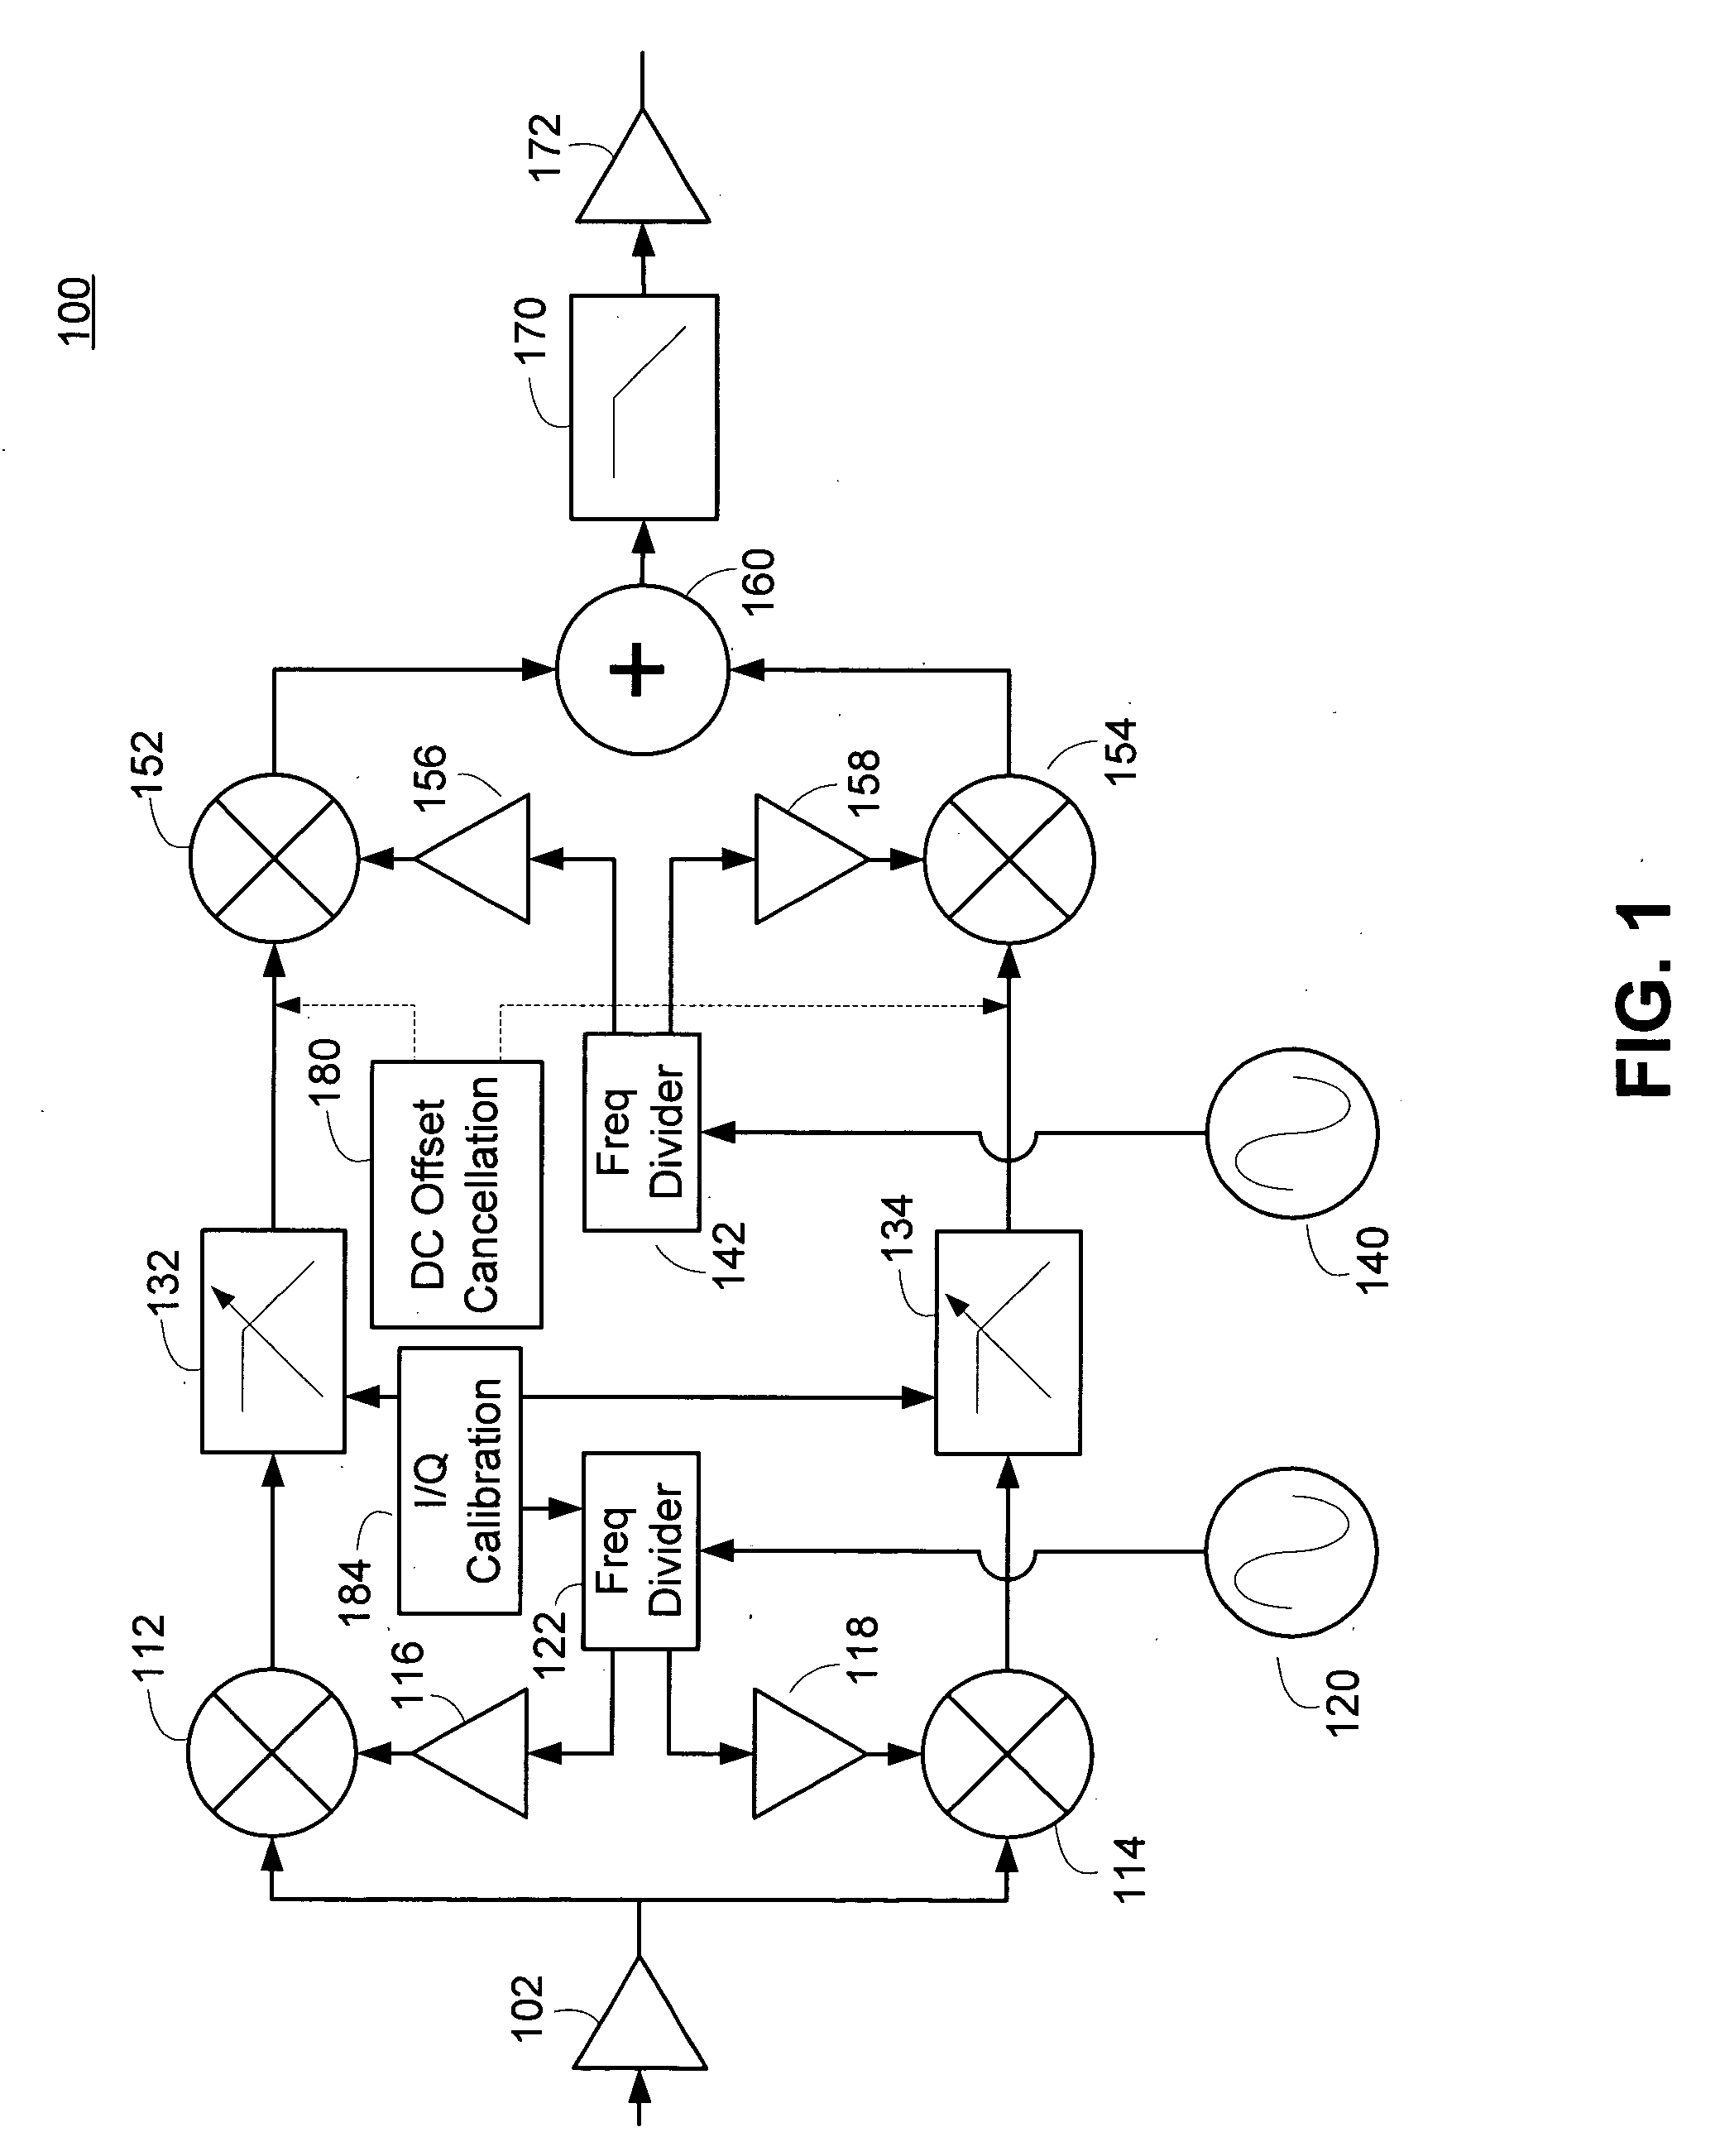 Dual conversion receiver with programmable intermediate frequency and channel selection